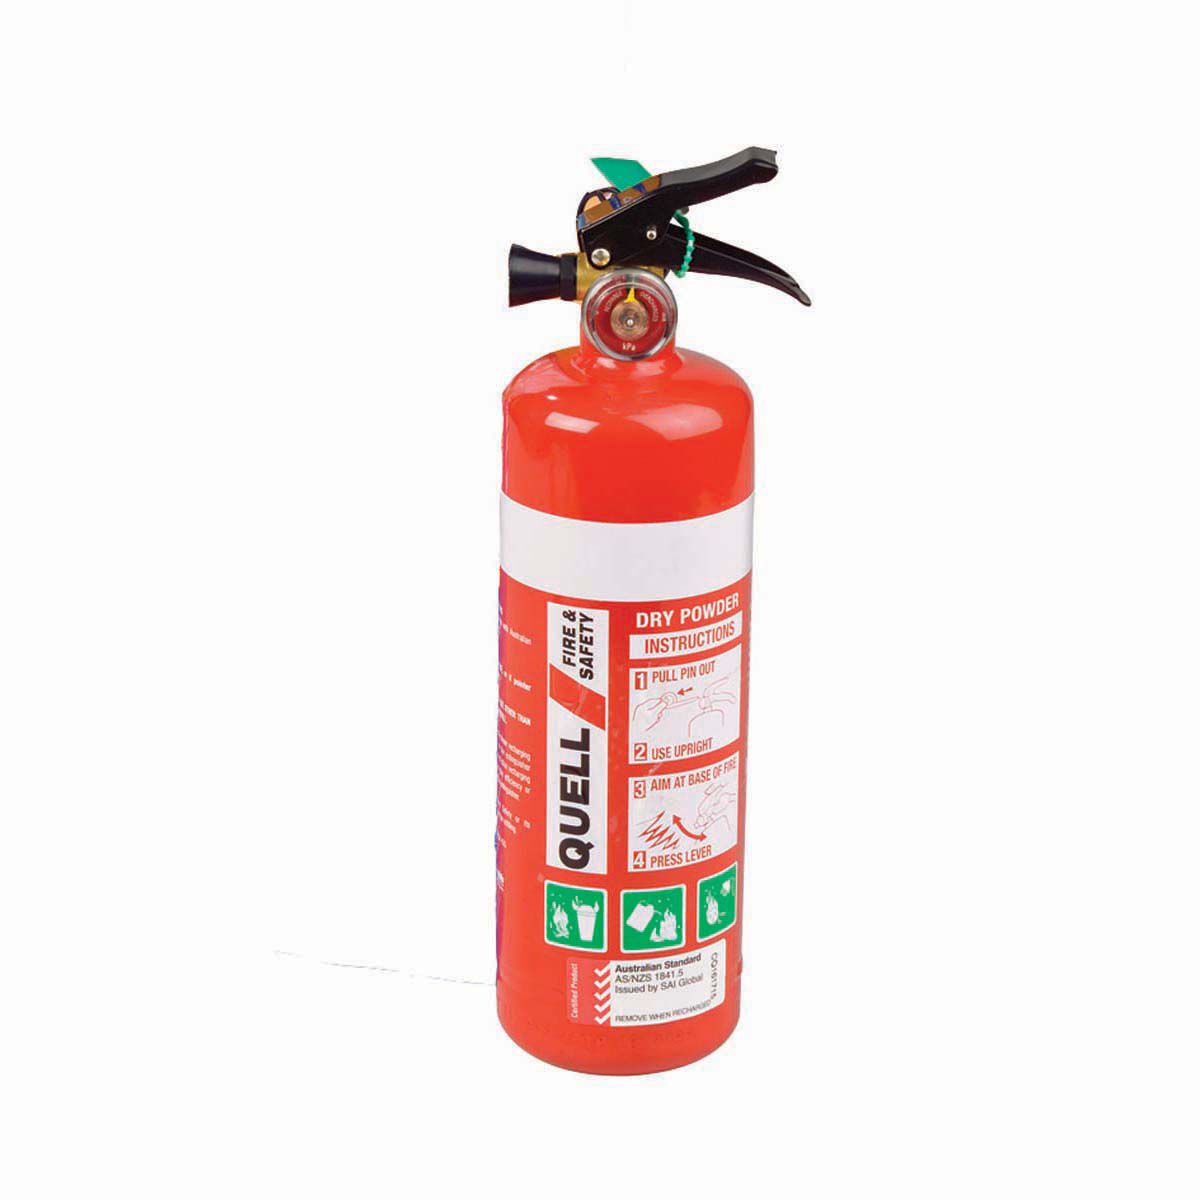 small fire extinguishers for sale